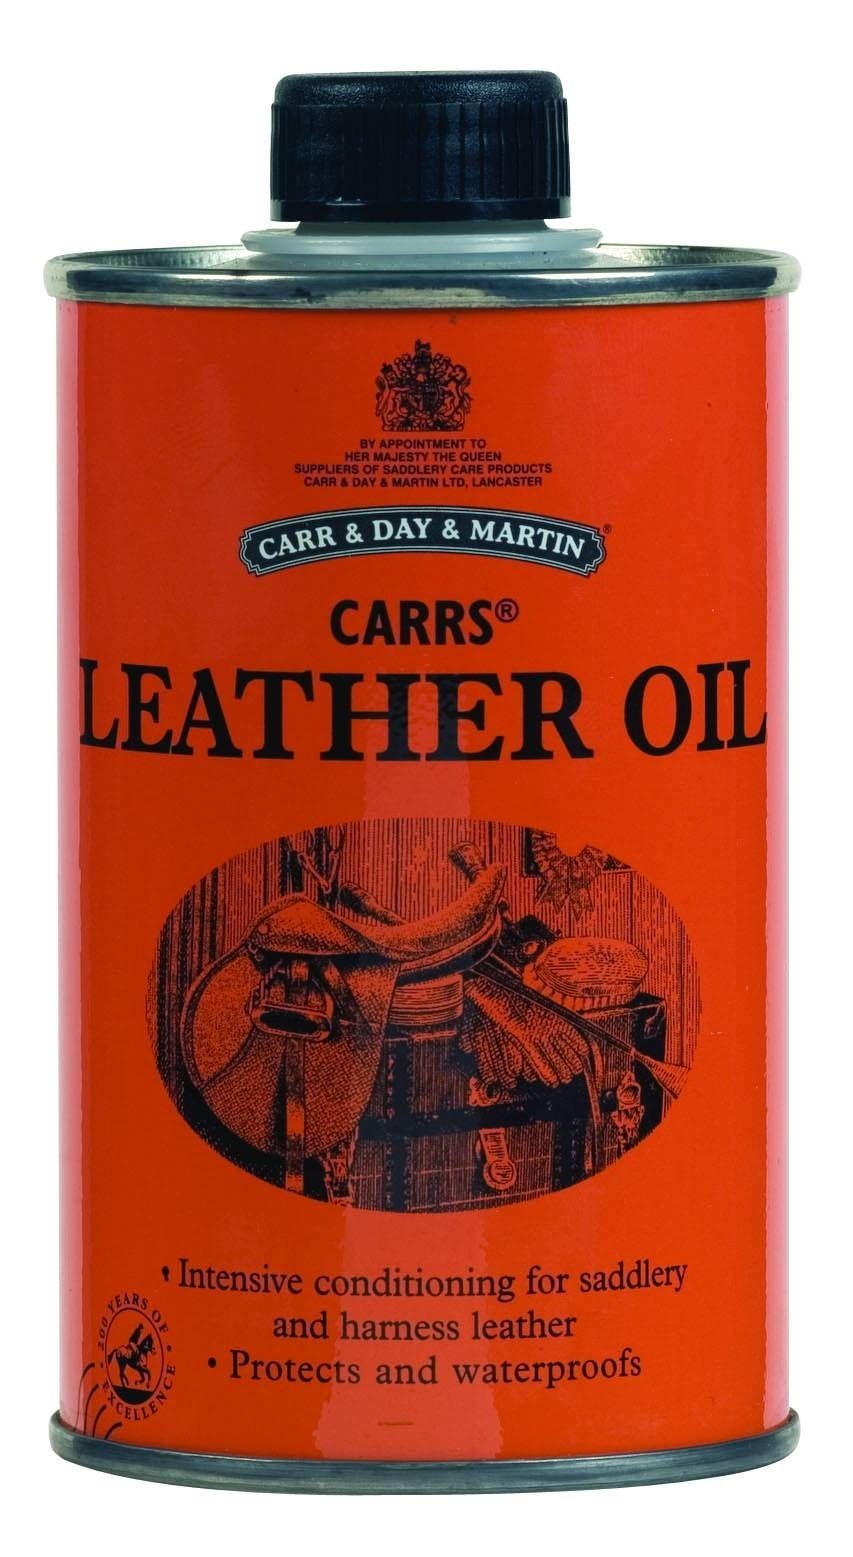 Carr & Day & Martin Carrs Leather Oil - Just Horse Riders